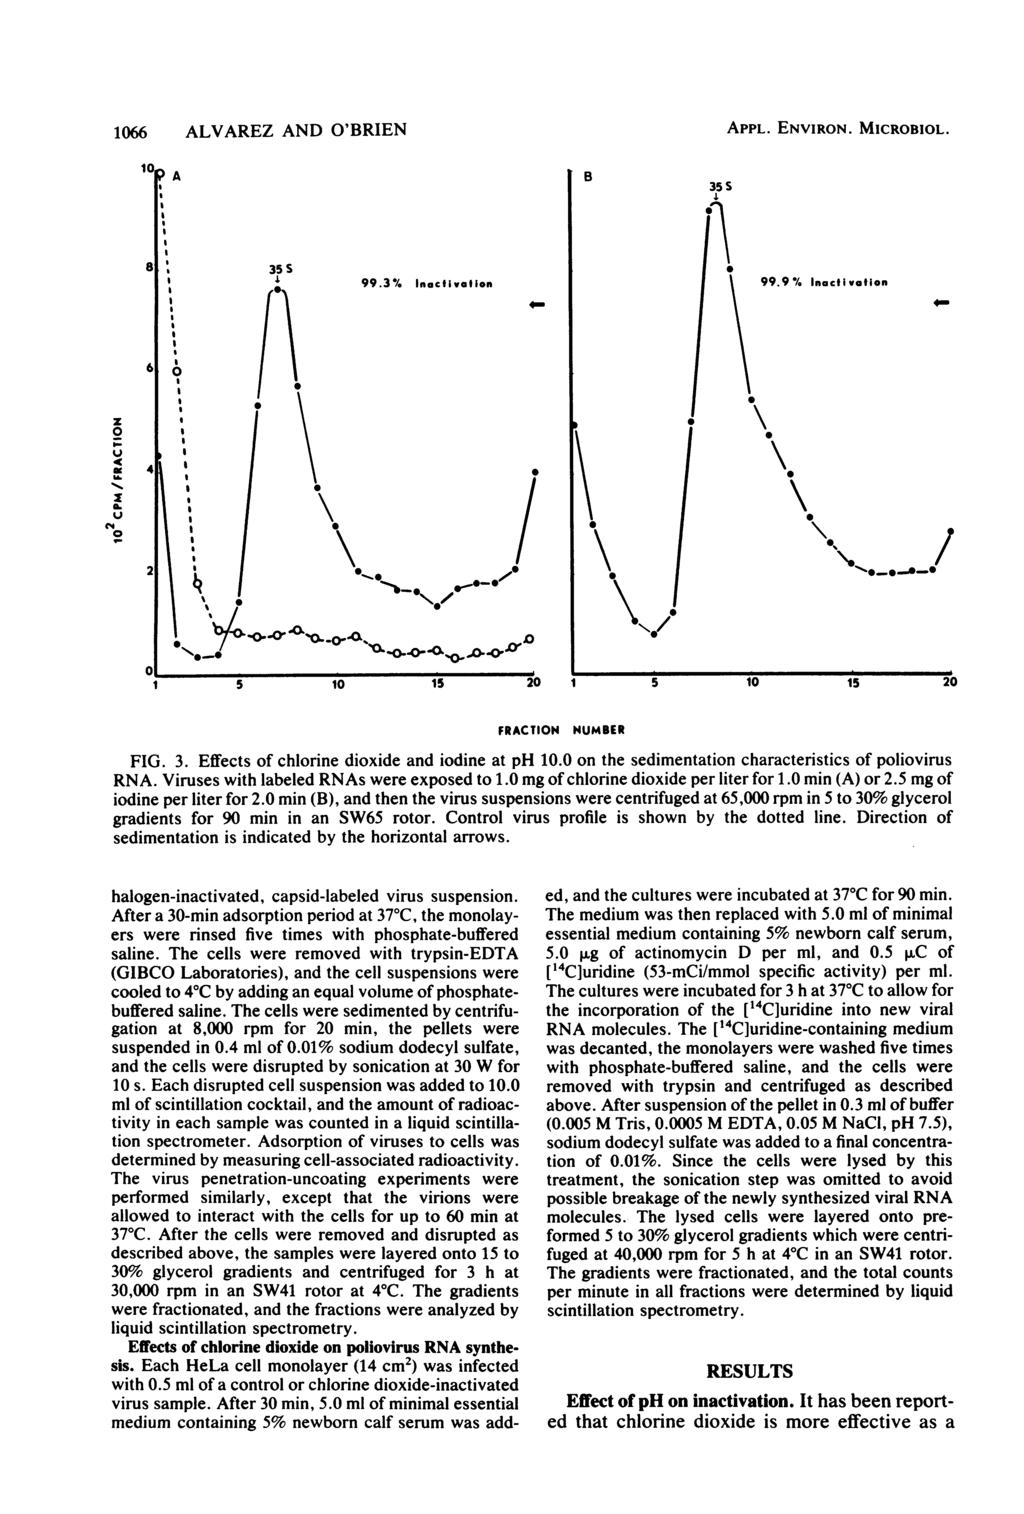 166 ALVAREZ AND O'BRIEN APPL. ENVIRON. MICROBIOL. A 99.3% Inacfivafion Z IL. 4 2 "b- en.o.o4..--c - ol 1 5 1 15 2 1 5 1 15 2 FRACTION NUMBER FIG. 3. Effects of chlorine dioxide and iodine at ph 1.